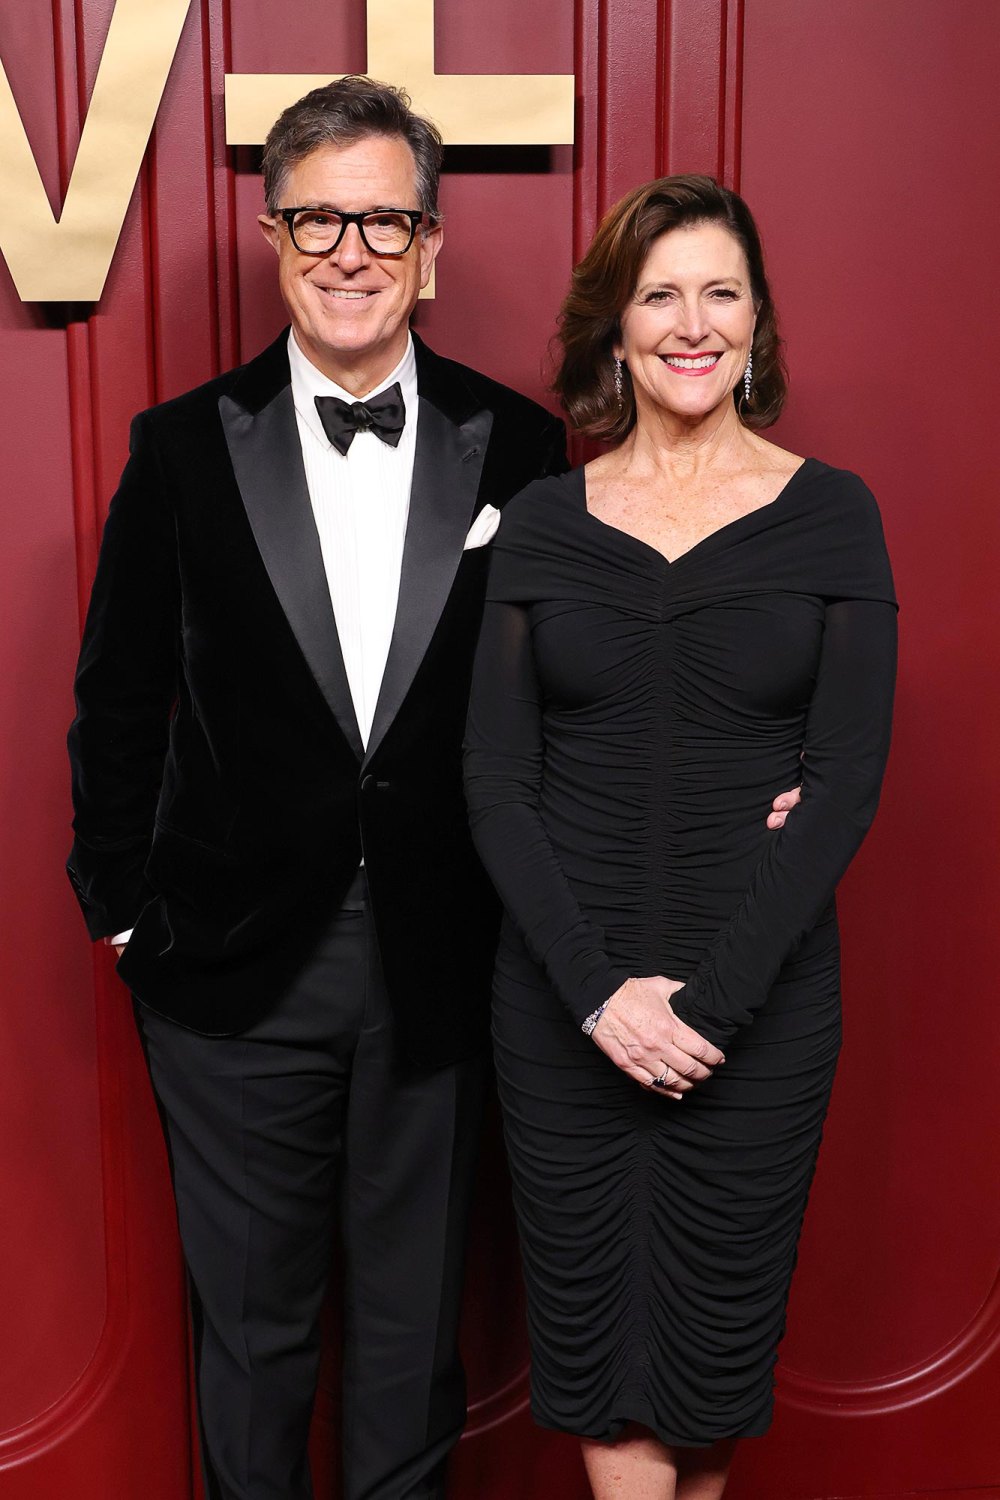 Stephen Colbert Says His Wife Saved His Life After He Suffered a Ruptured Appendix and Blood Poisoning 749